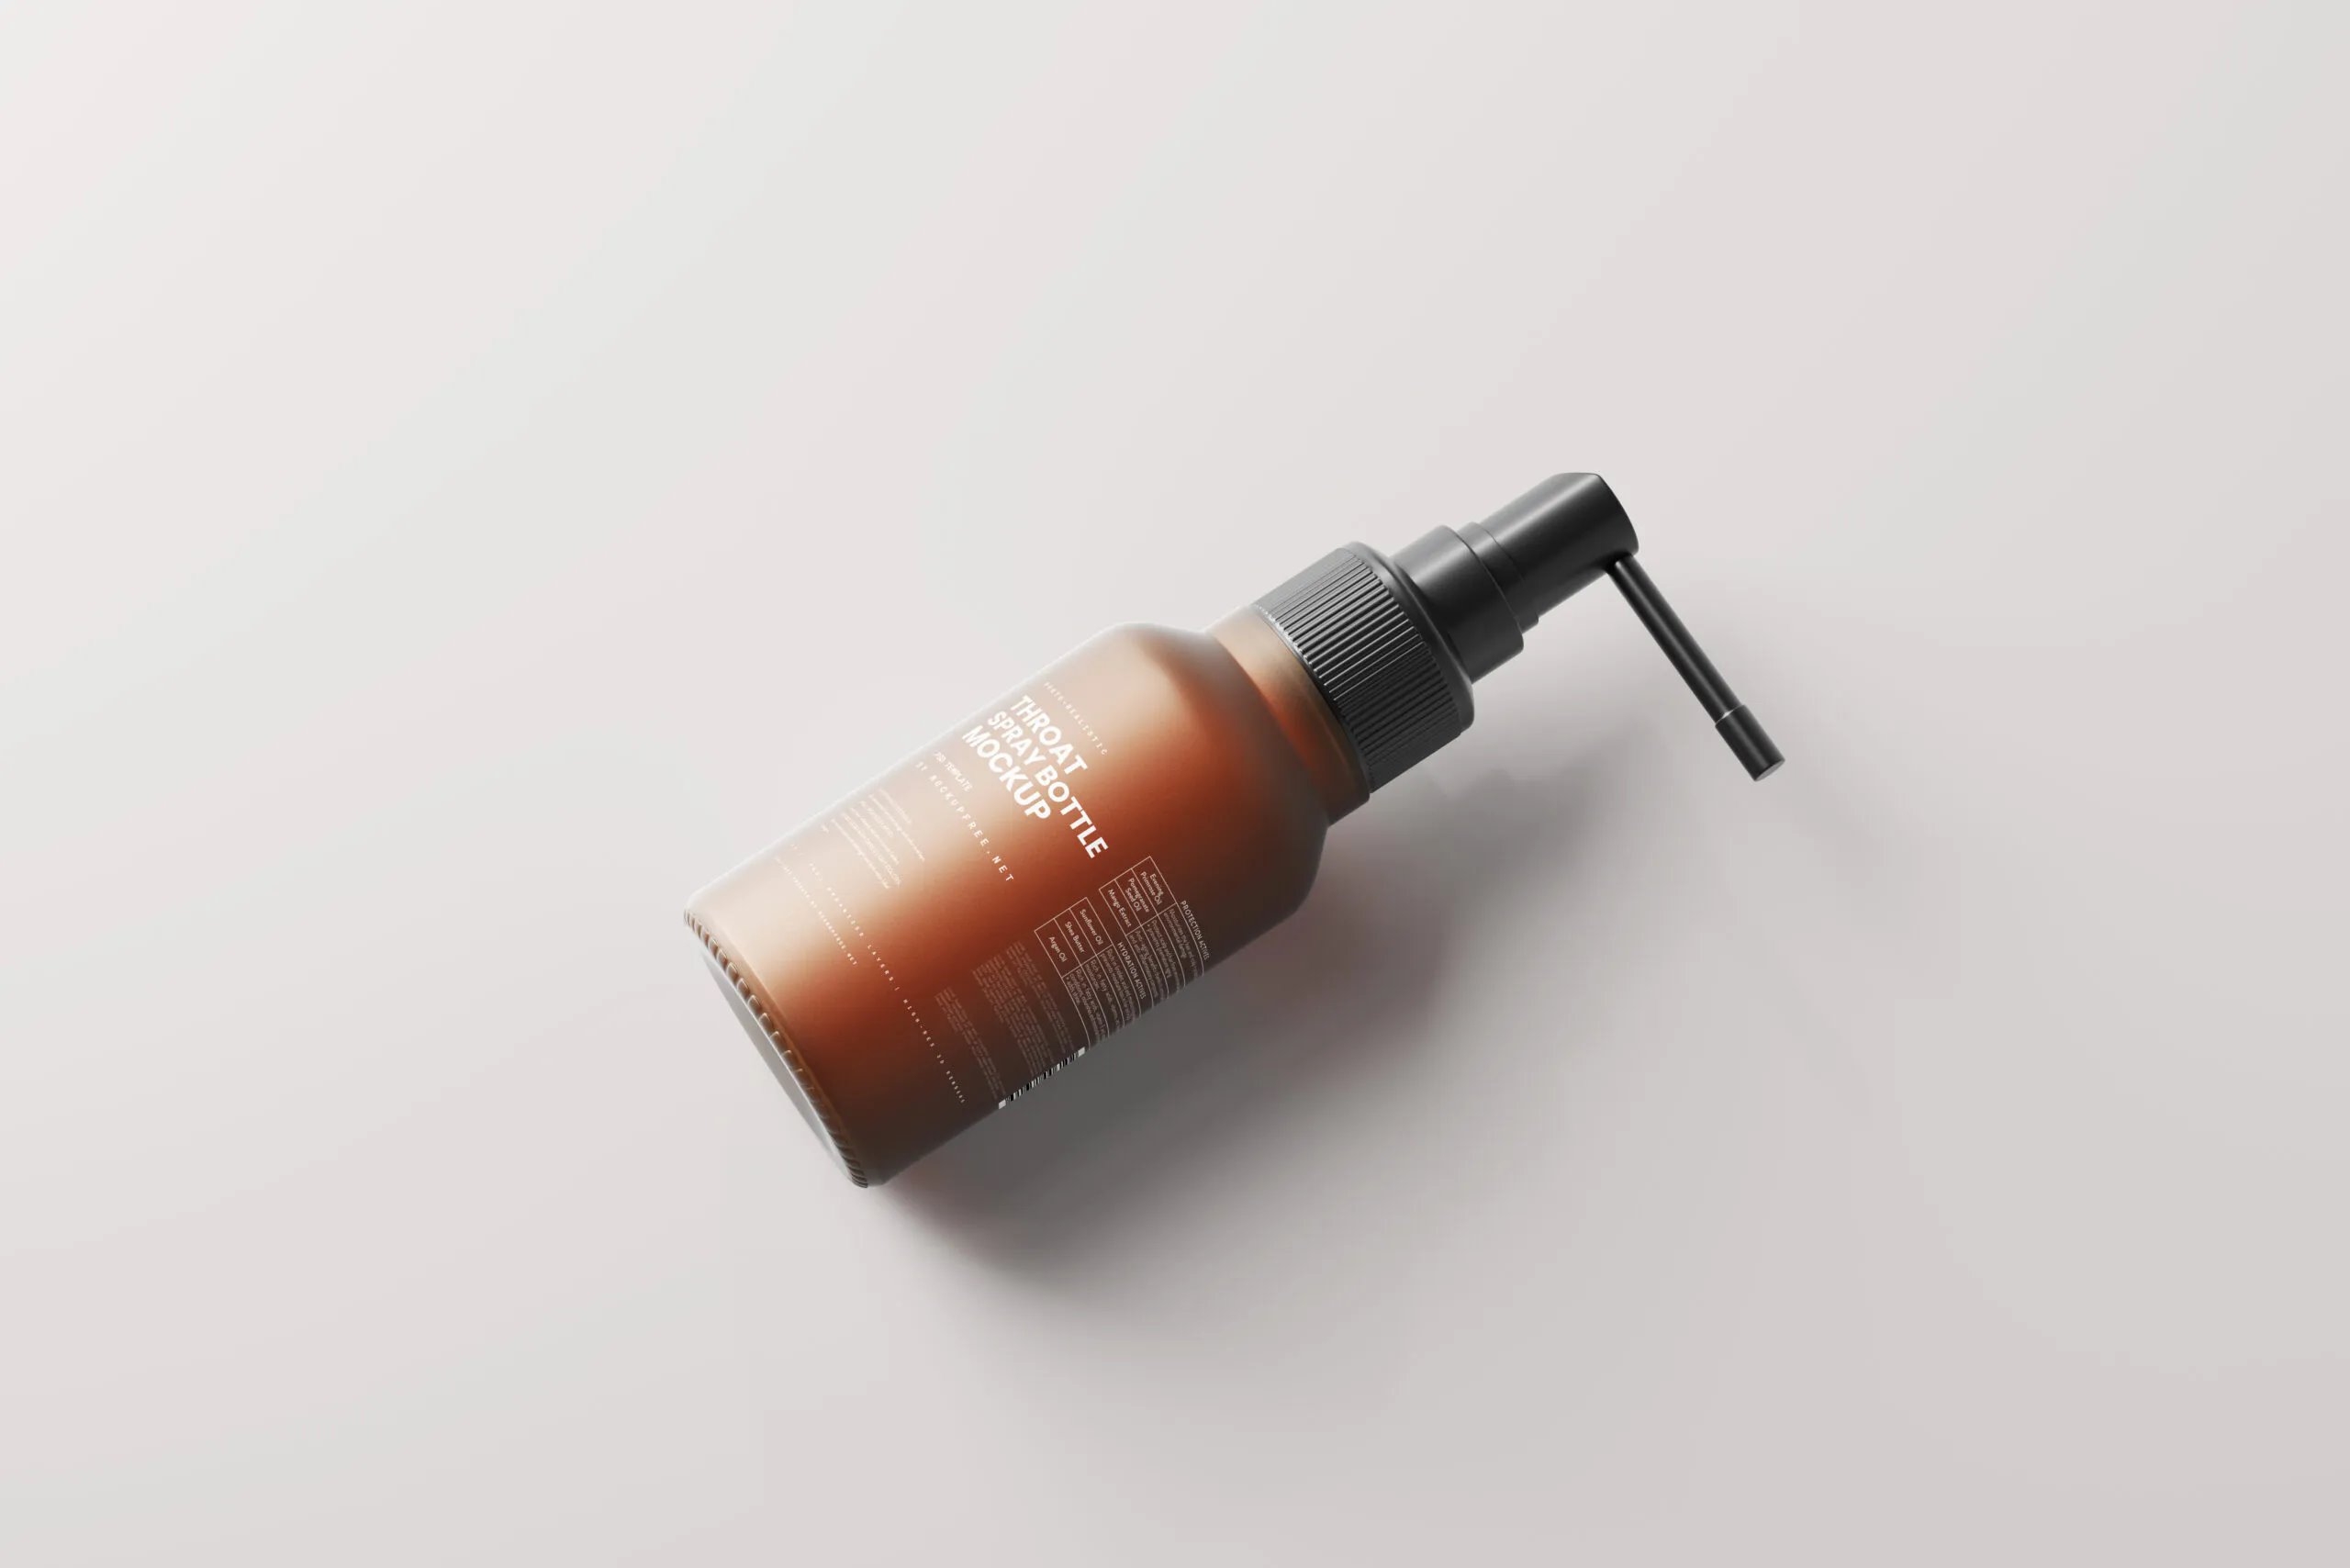 6 Amber Glass Throat Spray Bottle Mockups with Label FREE PSD